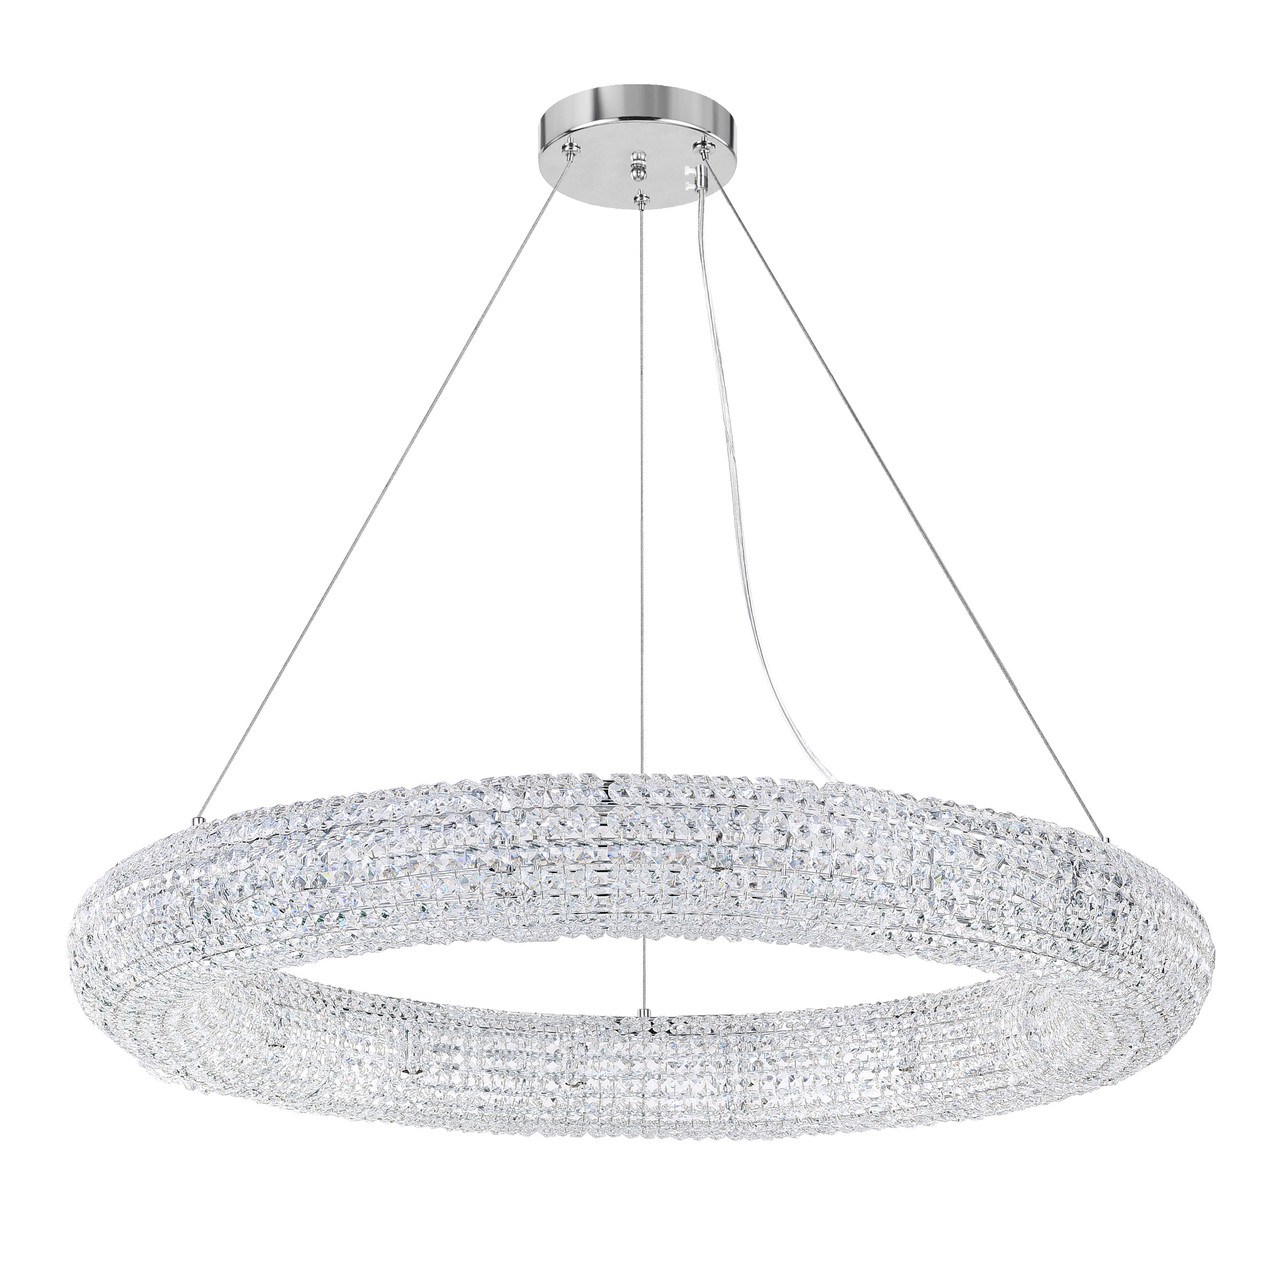 CWI LIGHTING 1057P40-16-601 16 Light Chandelier with Chrome Finish